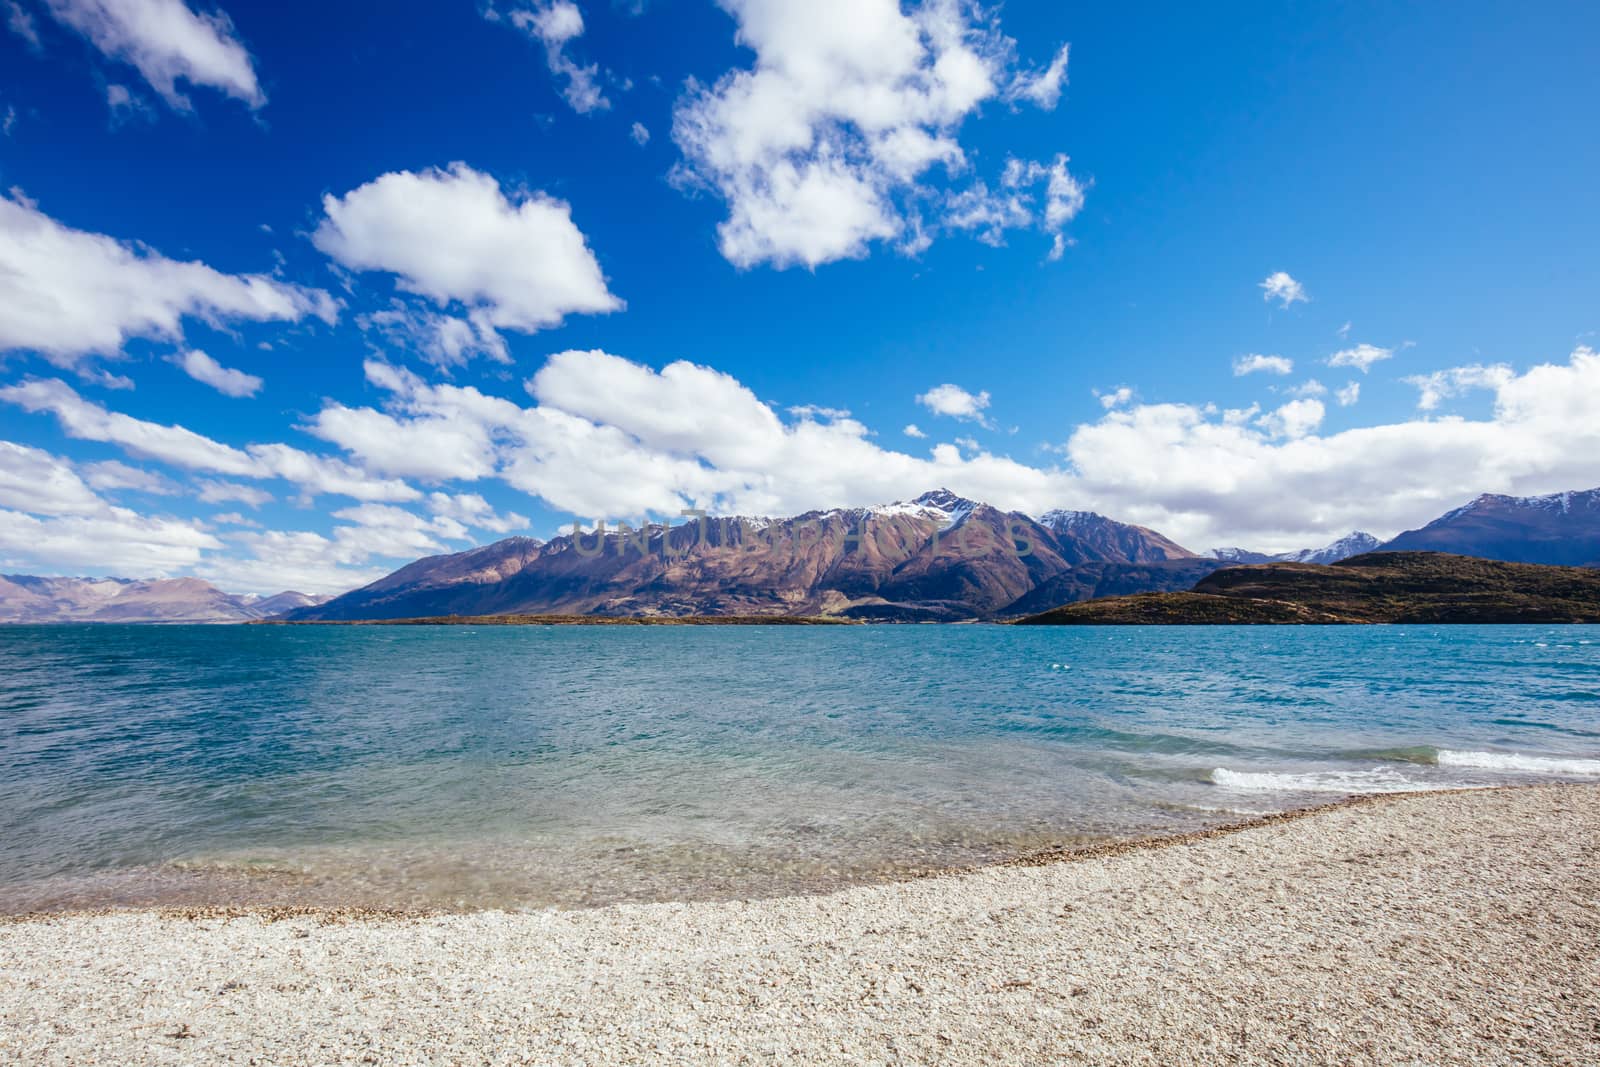 Lake Wakatipu and surrounding mountains from Twenty Five Mile Stream campground, on a sunny spring day near Glenorchy in New Zealand